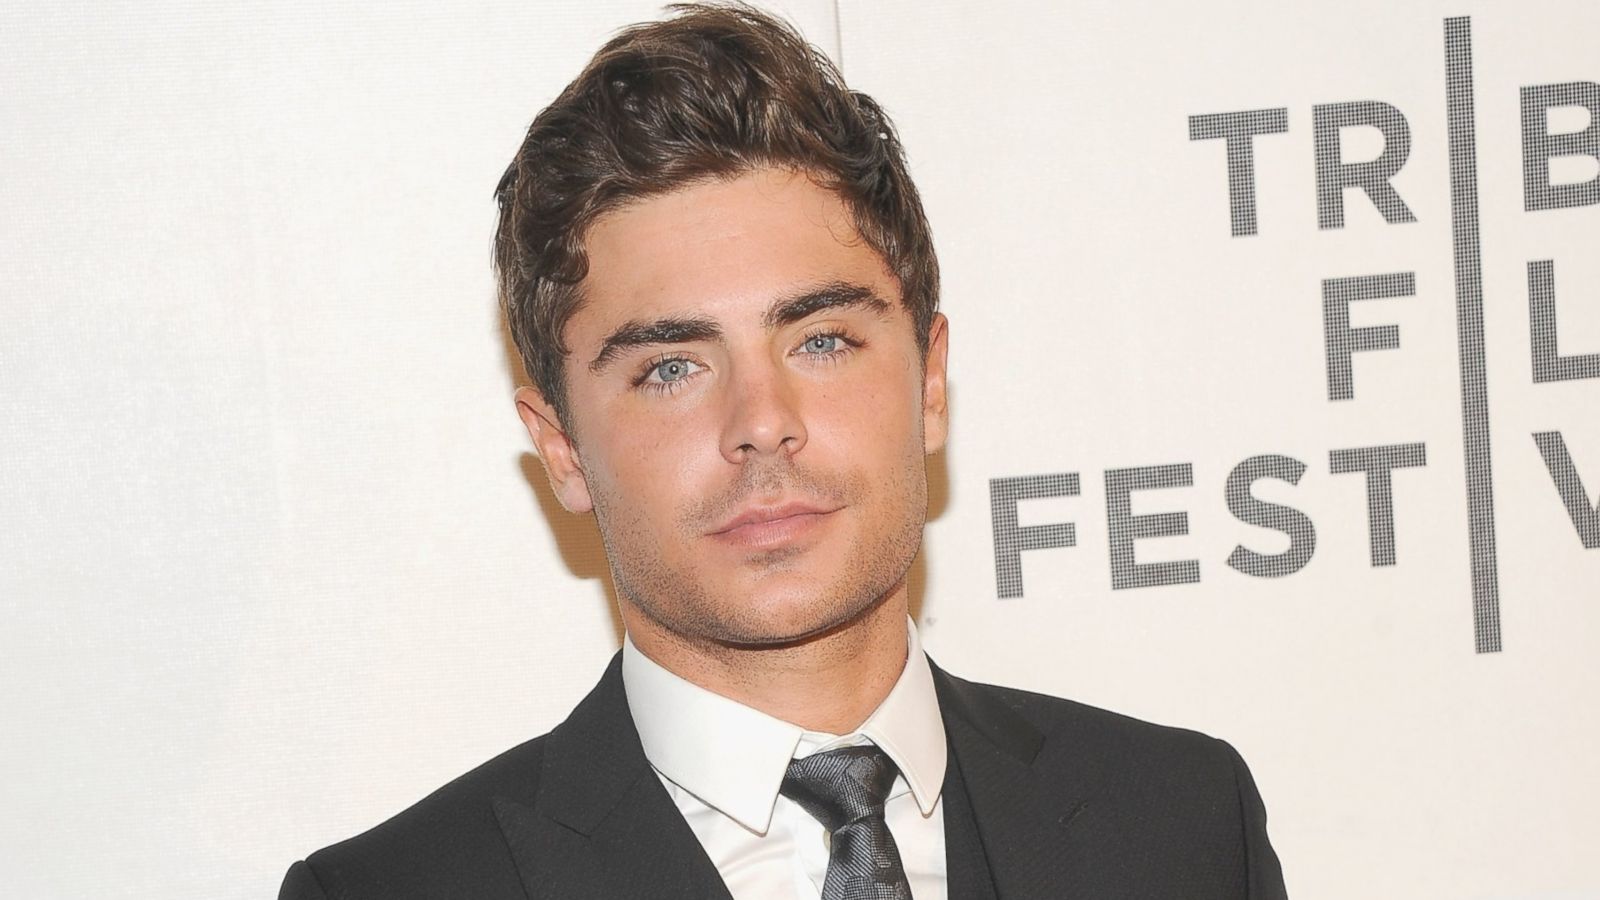 Zac Efron Does a Choreographed Dance to 'Turn Down for What'